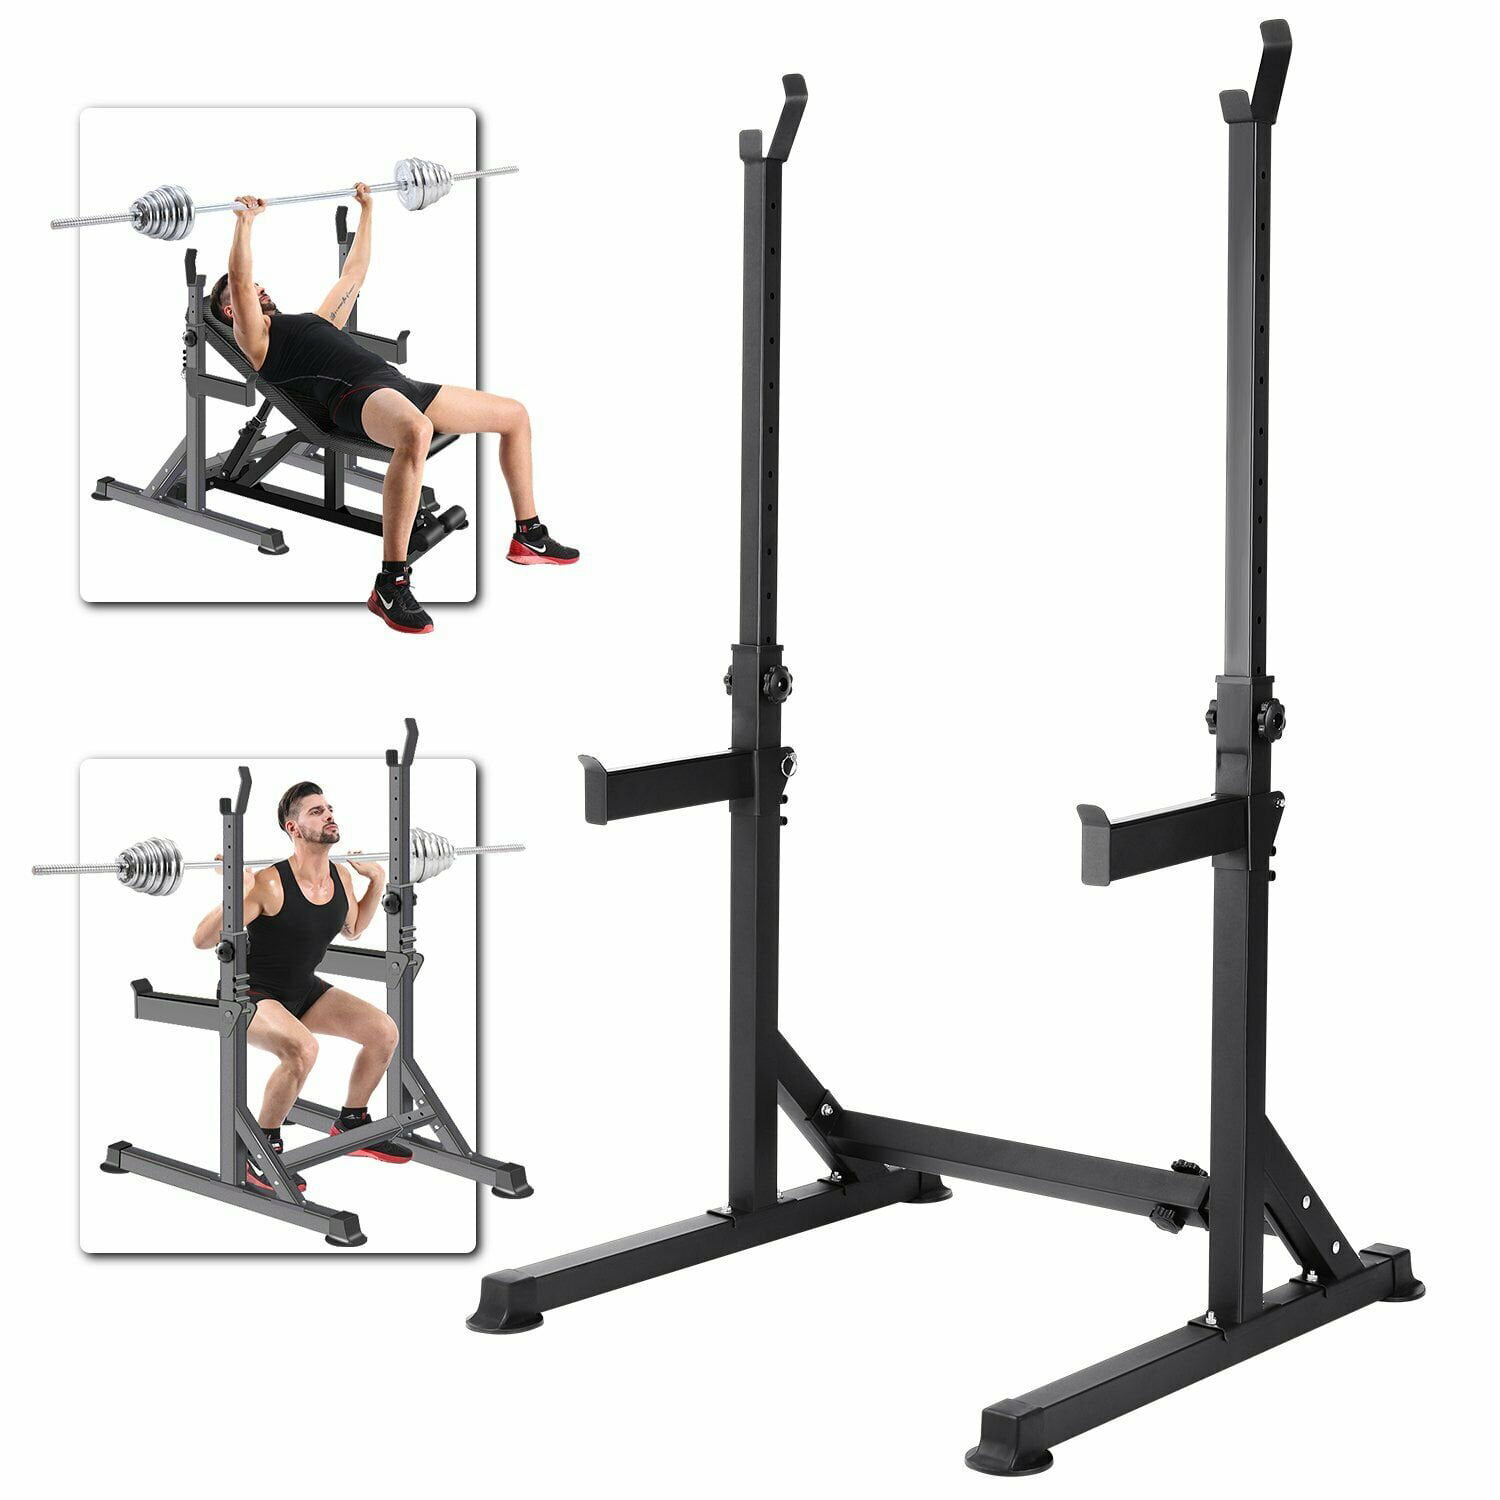 Squat Stands Power Rack Weight Lifting Home Gym Workout Fitness Equipment Gear 